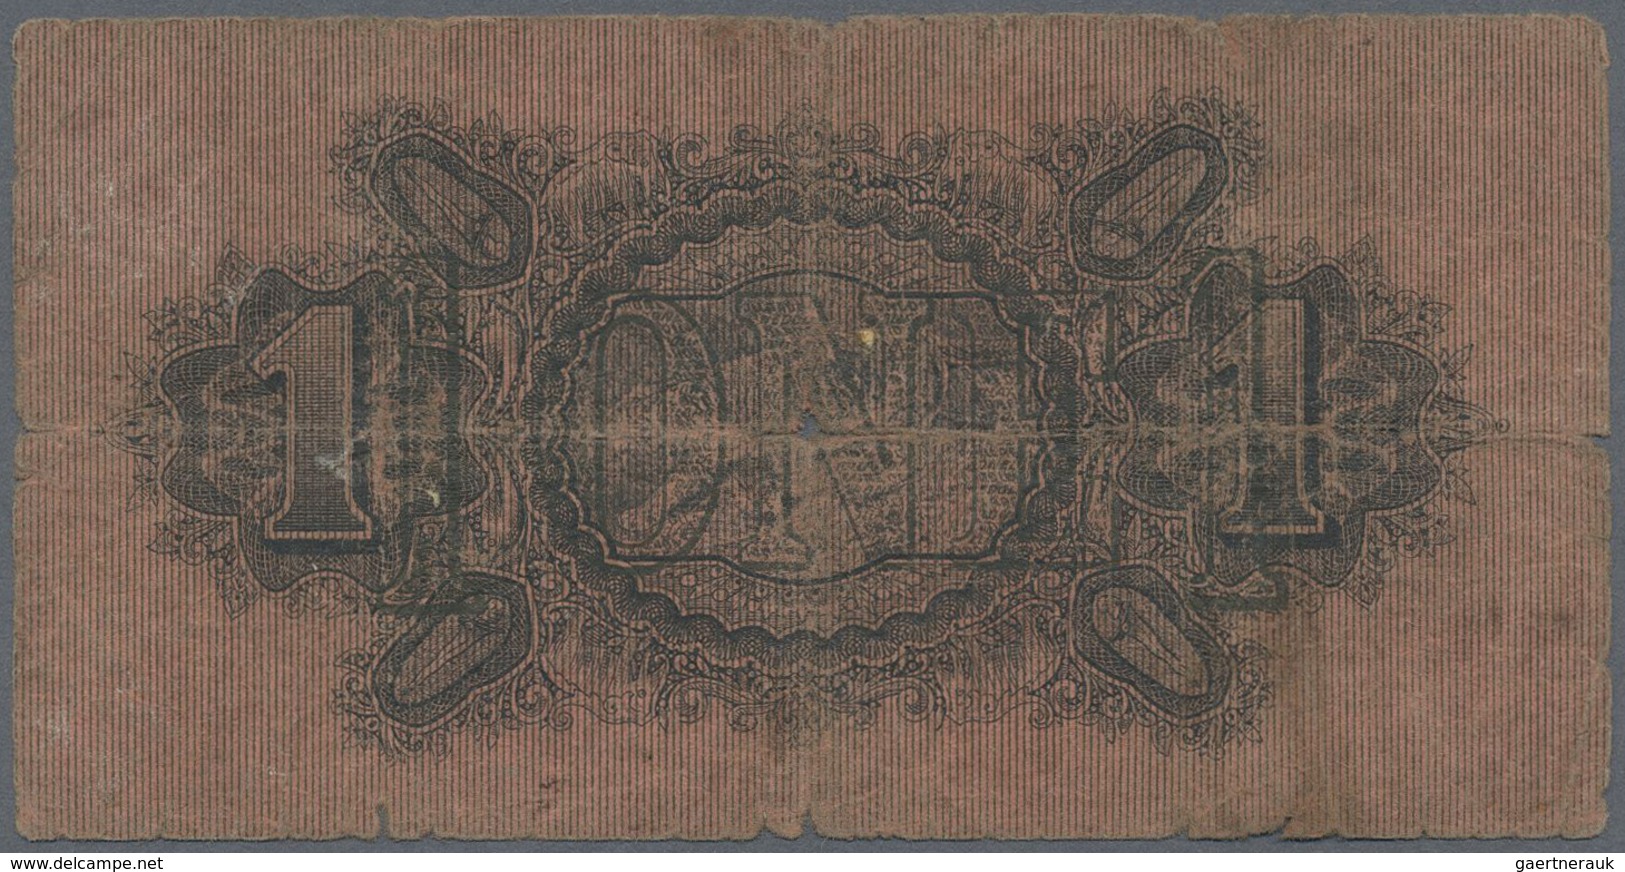 Straits Settlements: 1 Dollar 1911 P. 1b, Stronger Used With Strong Folds, Borders Worn, Center Hole - Malaysia